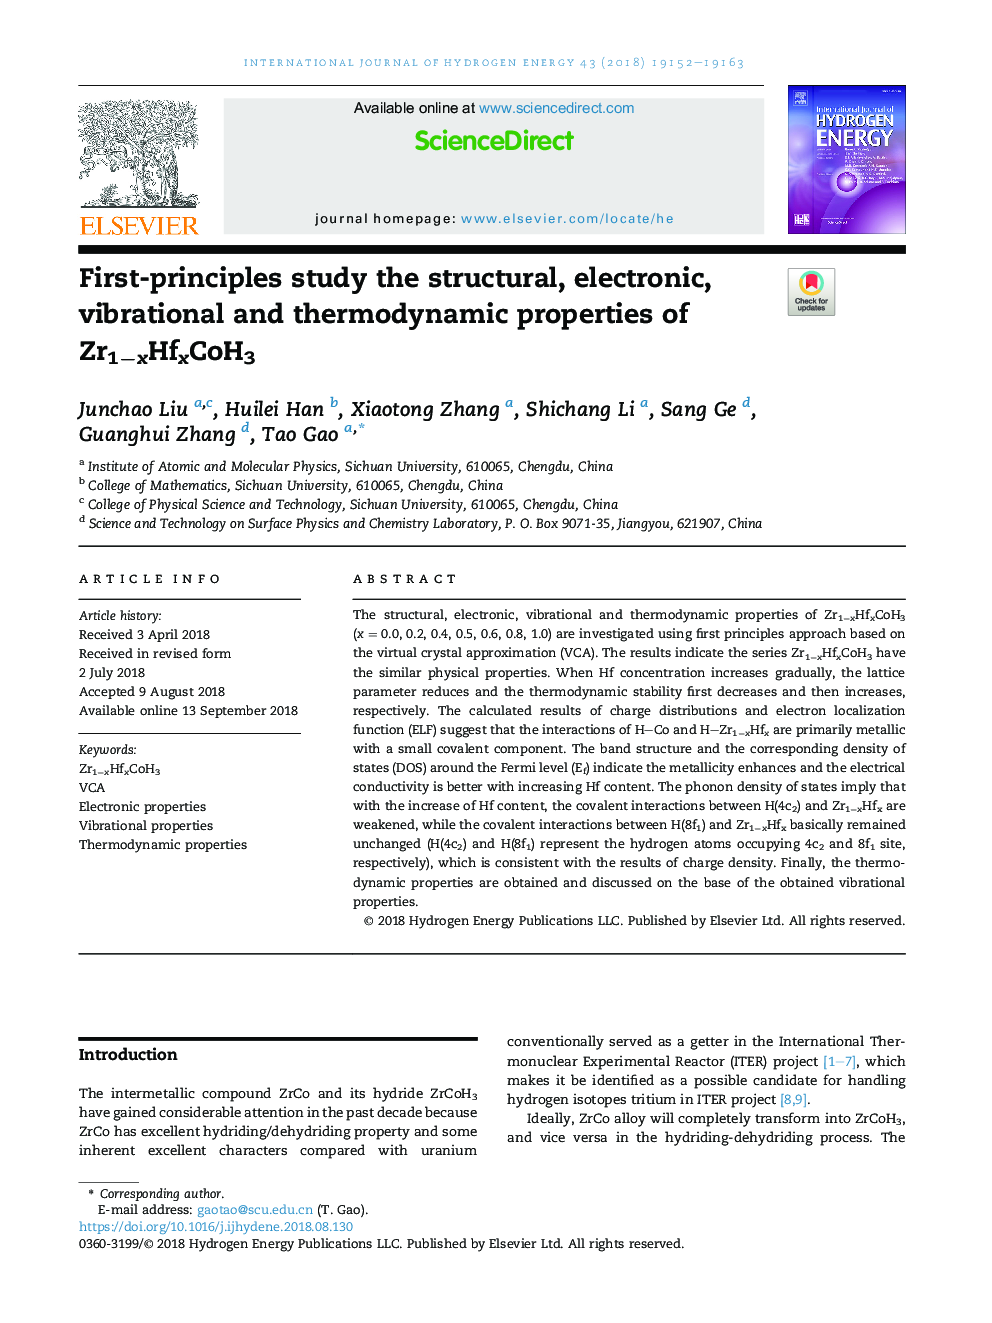 First-principles study the structural, electronic, vibrational and thermodynamic properties of Zr1âxHfxCoH3